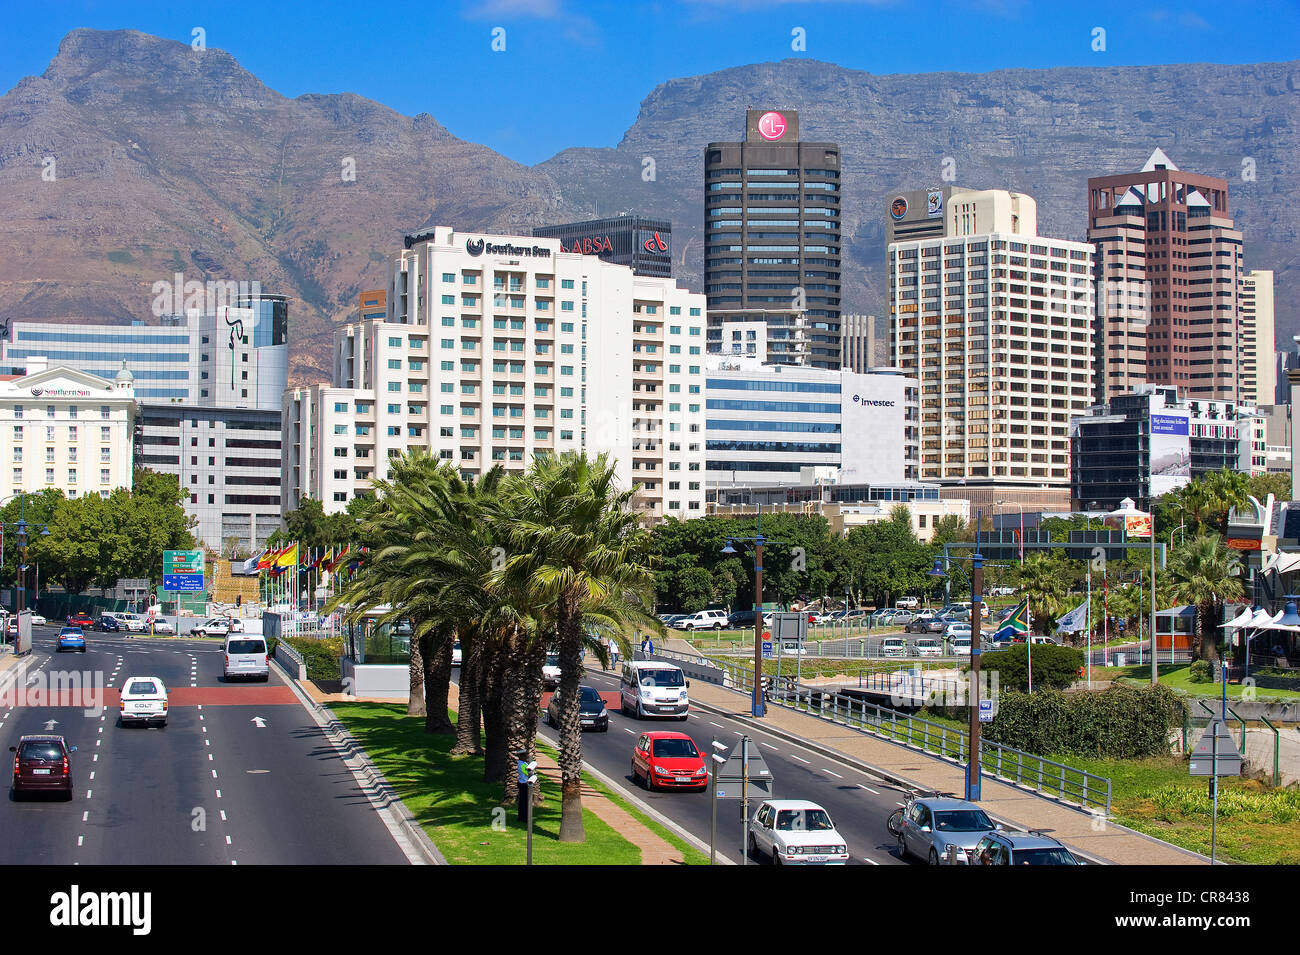 South Africa, Western Cape, Cape Town, the city center Stock Photo